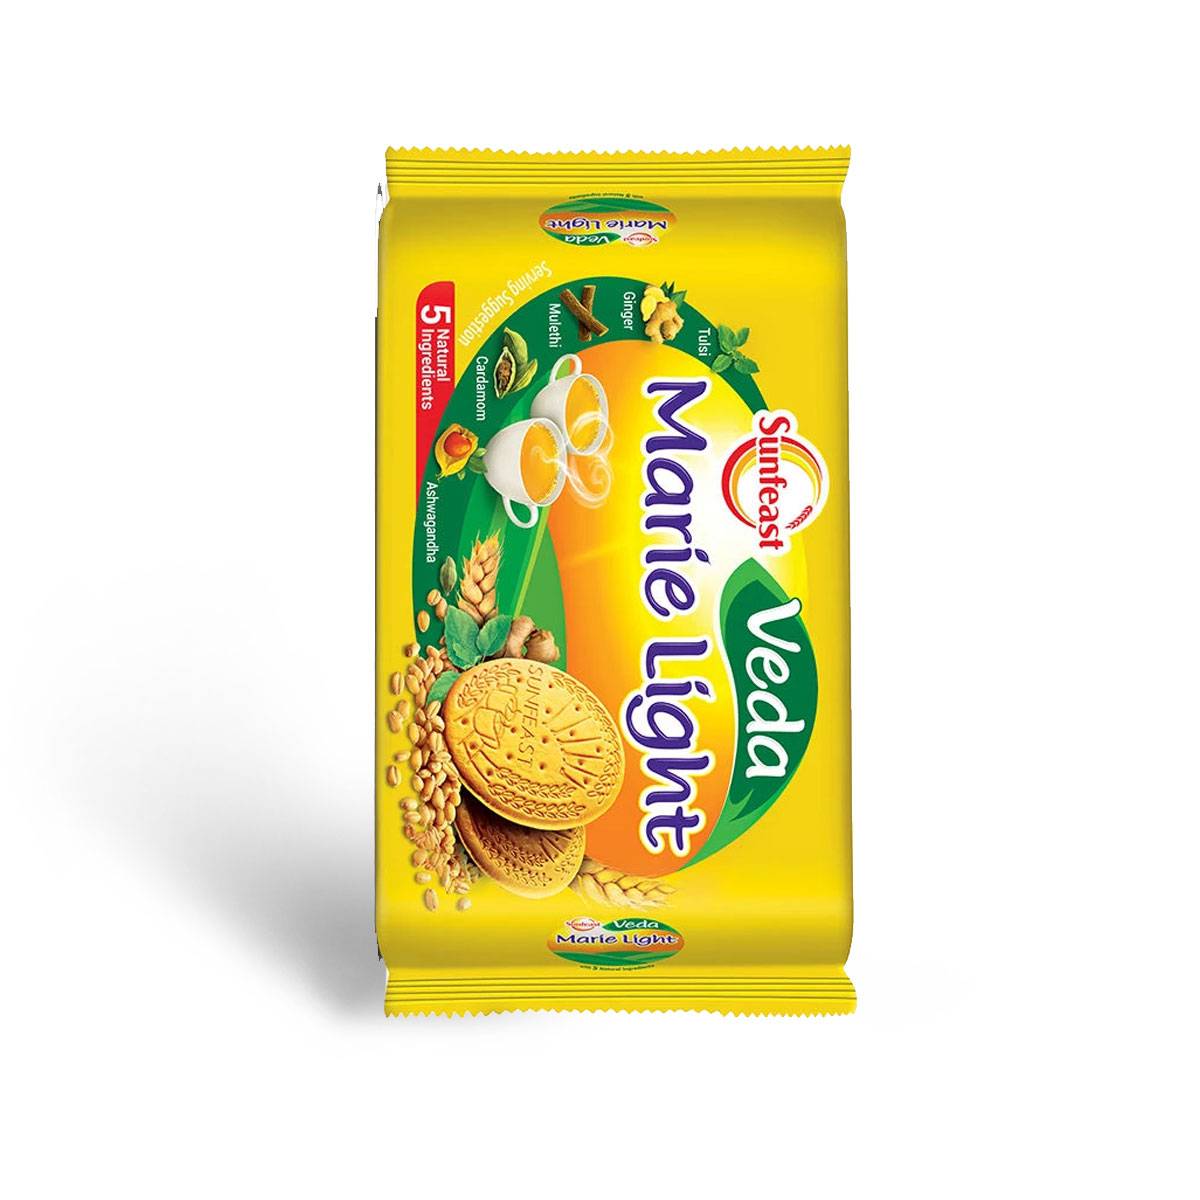 Sunfeast Marie Light Veda biscuit 250g